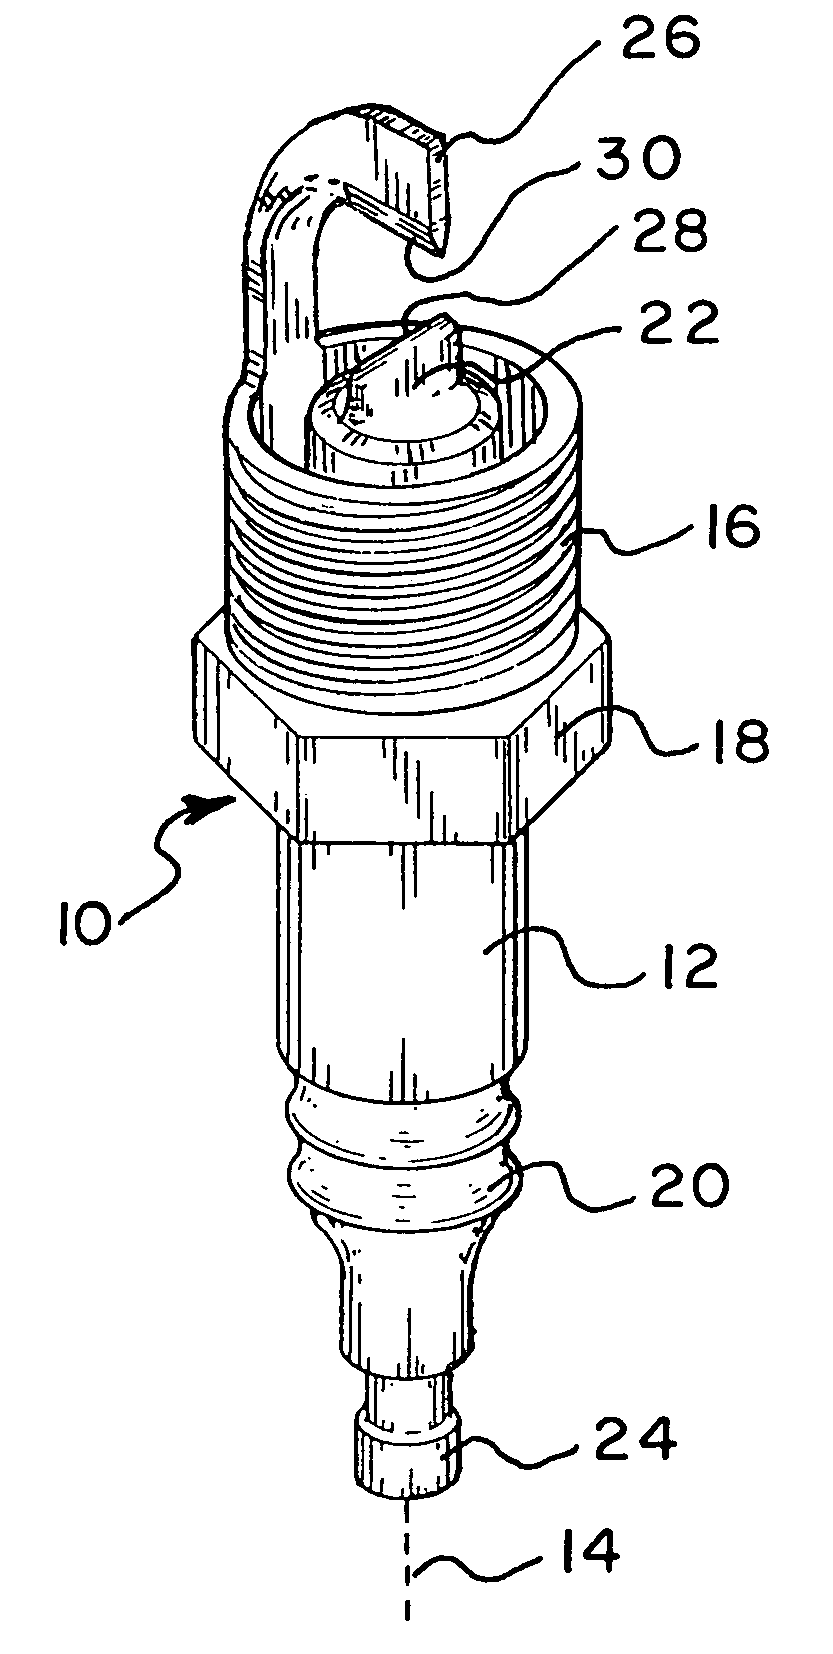 Spark plug with perpendicular knife edge electrodes